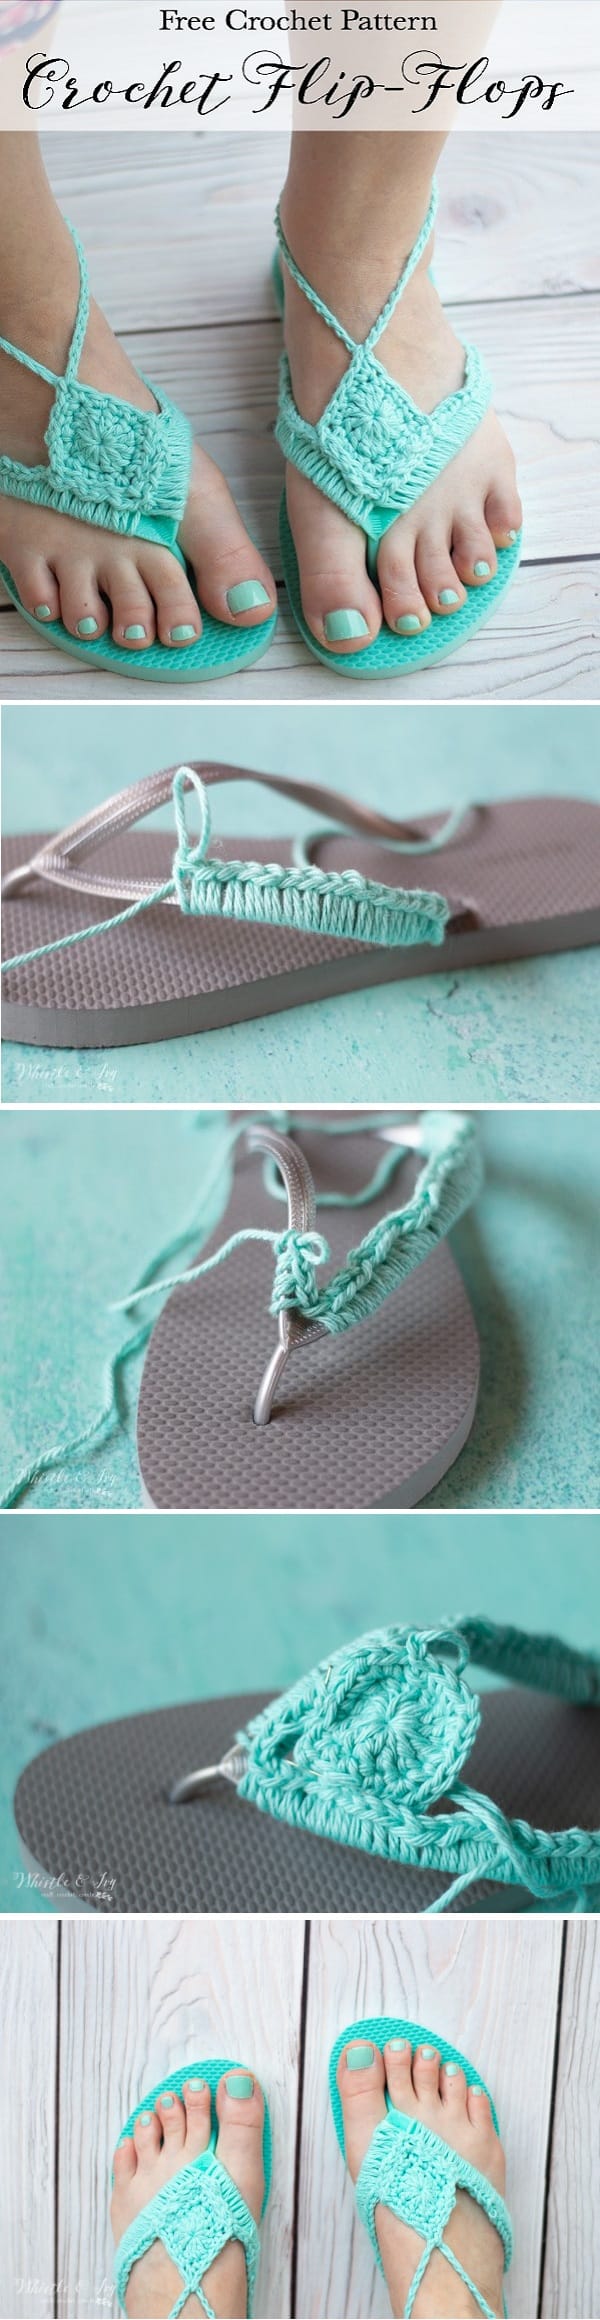 Crochet Flip Flops Upcycle - Turn your cheap foam flip flops into cute boho crochet sandals with this easy crochet hack.